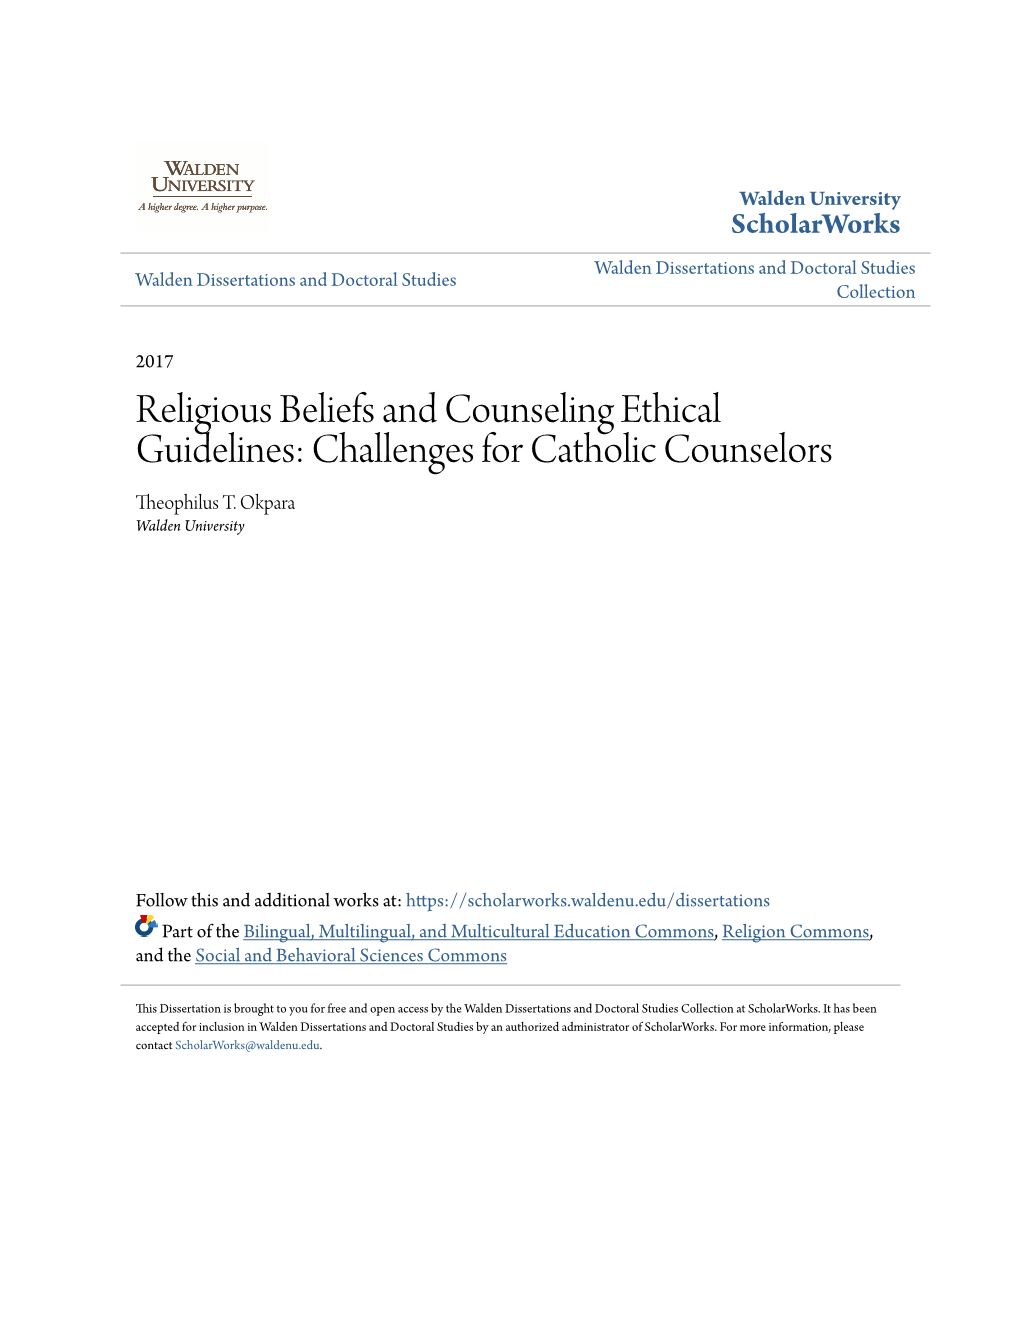 Religious Beliefs and Counseling Ethical Guidelines: Challenges for Catholic Counselors Theophilus T